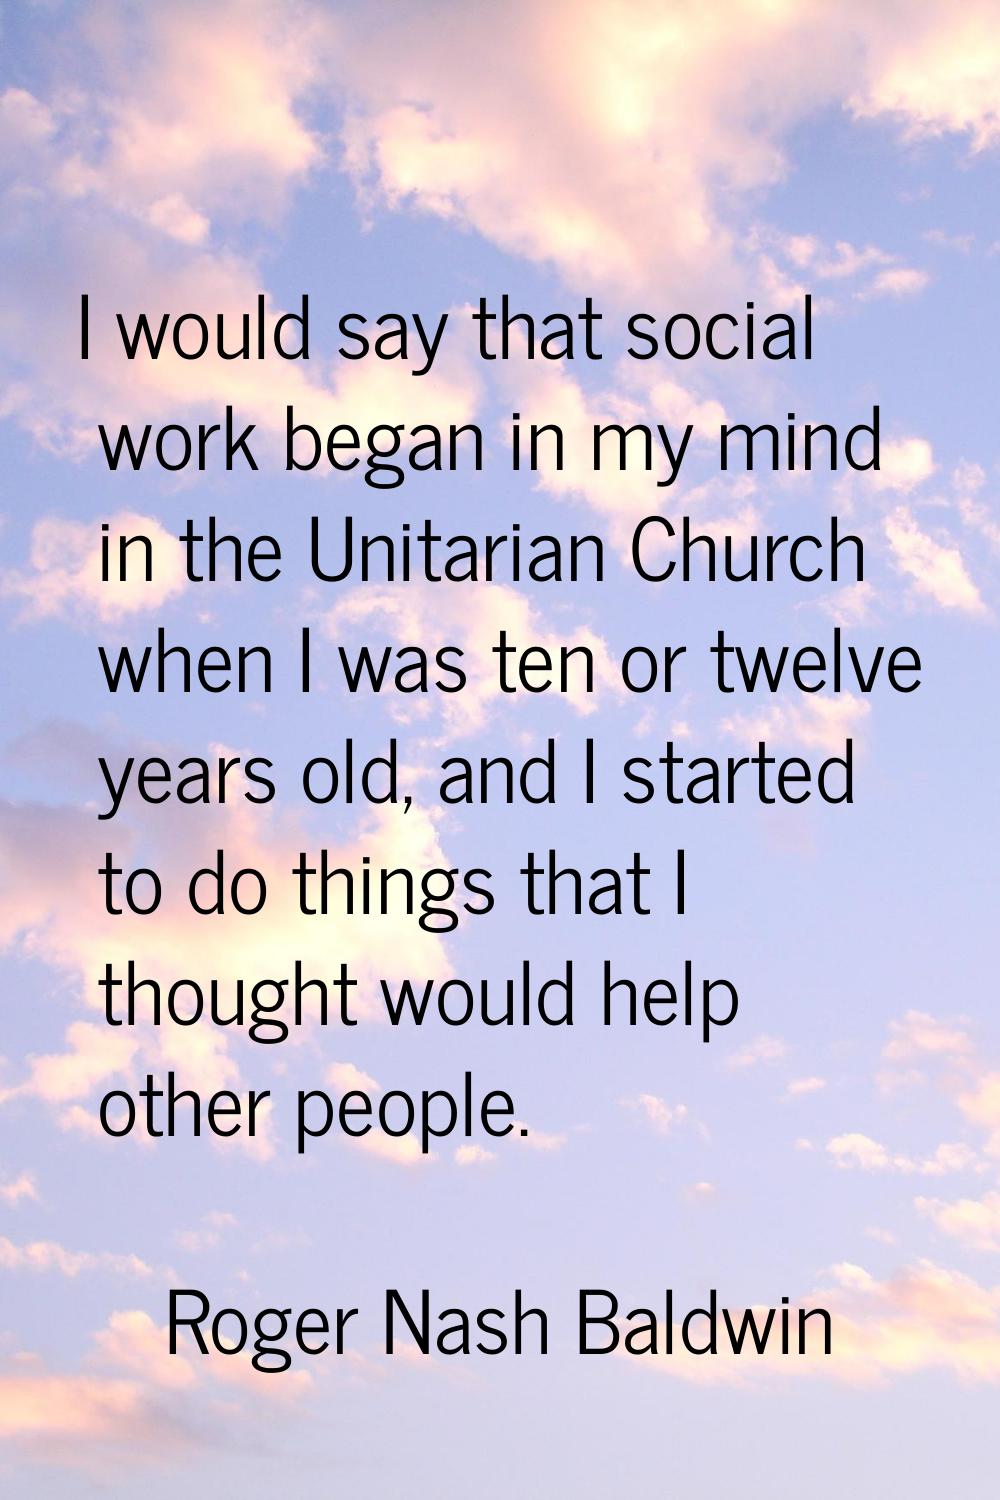 I would say that social work began in my mind in the Unitarian Church when I was ten or twelve year